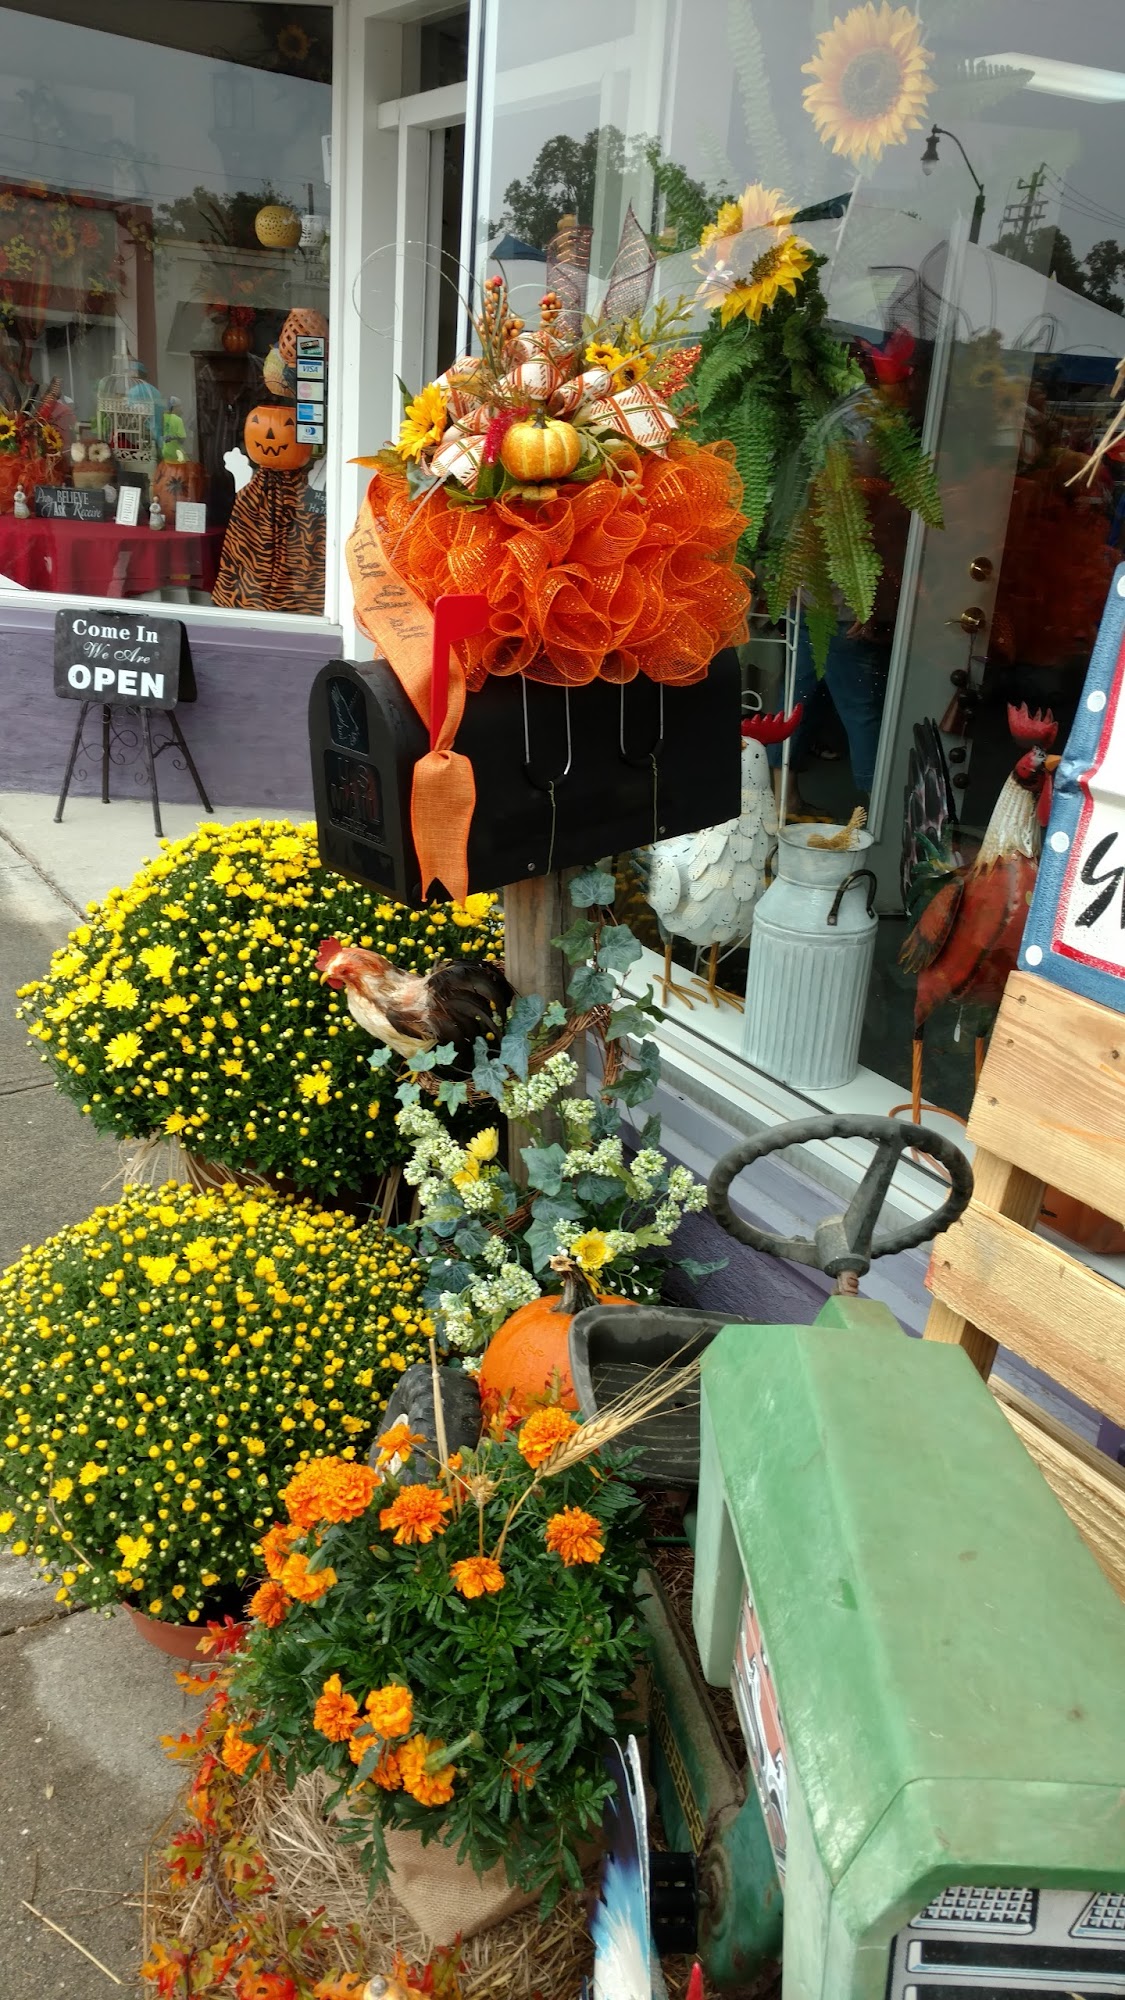 Abbey's Flowers & Gifts 162 Main St, Chesterfield South Carolina 29709